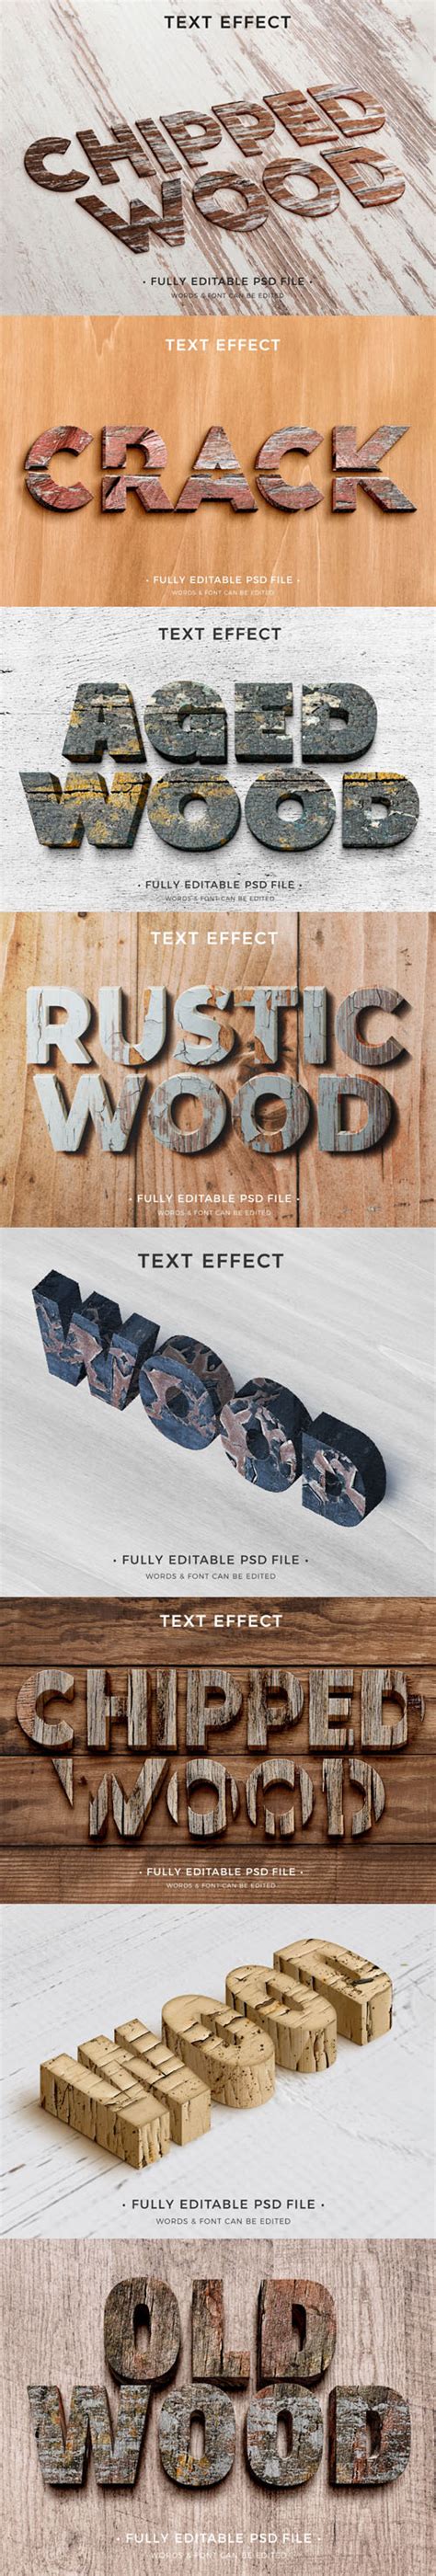 8 Wooden Text Effects Templates For Photoshop